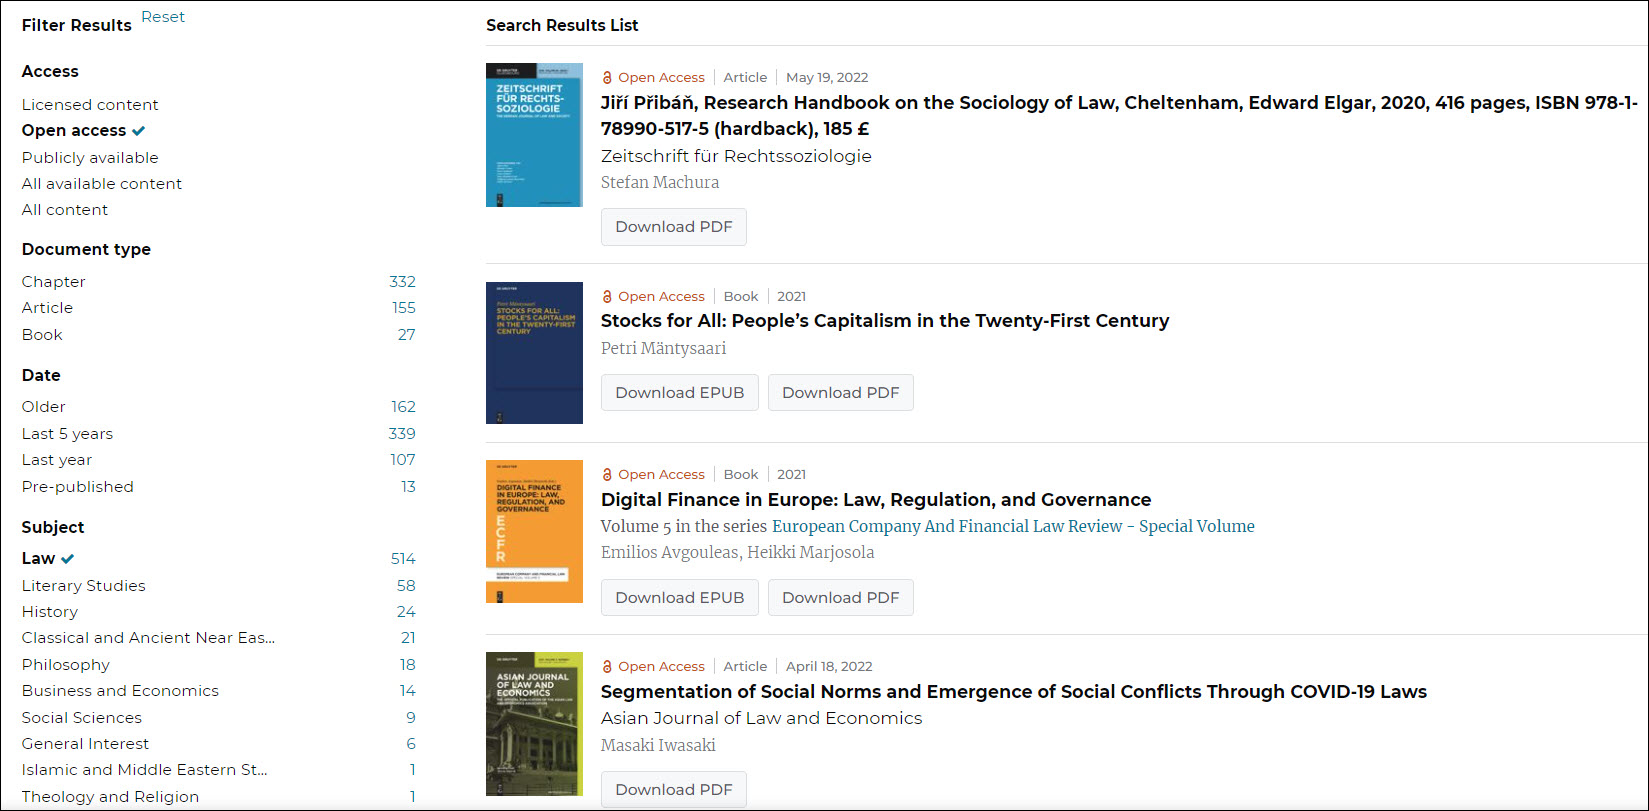 a screenshot showing DeGruyter's website and several of their open access law titles.